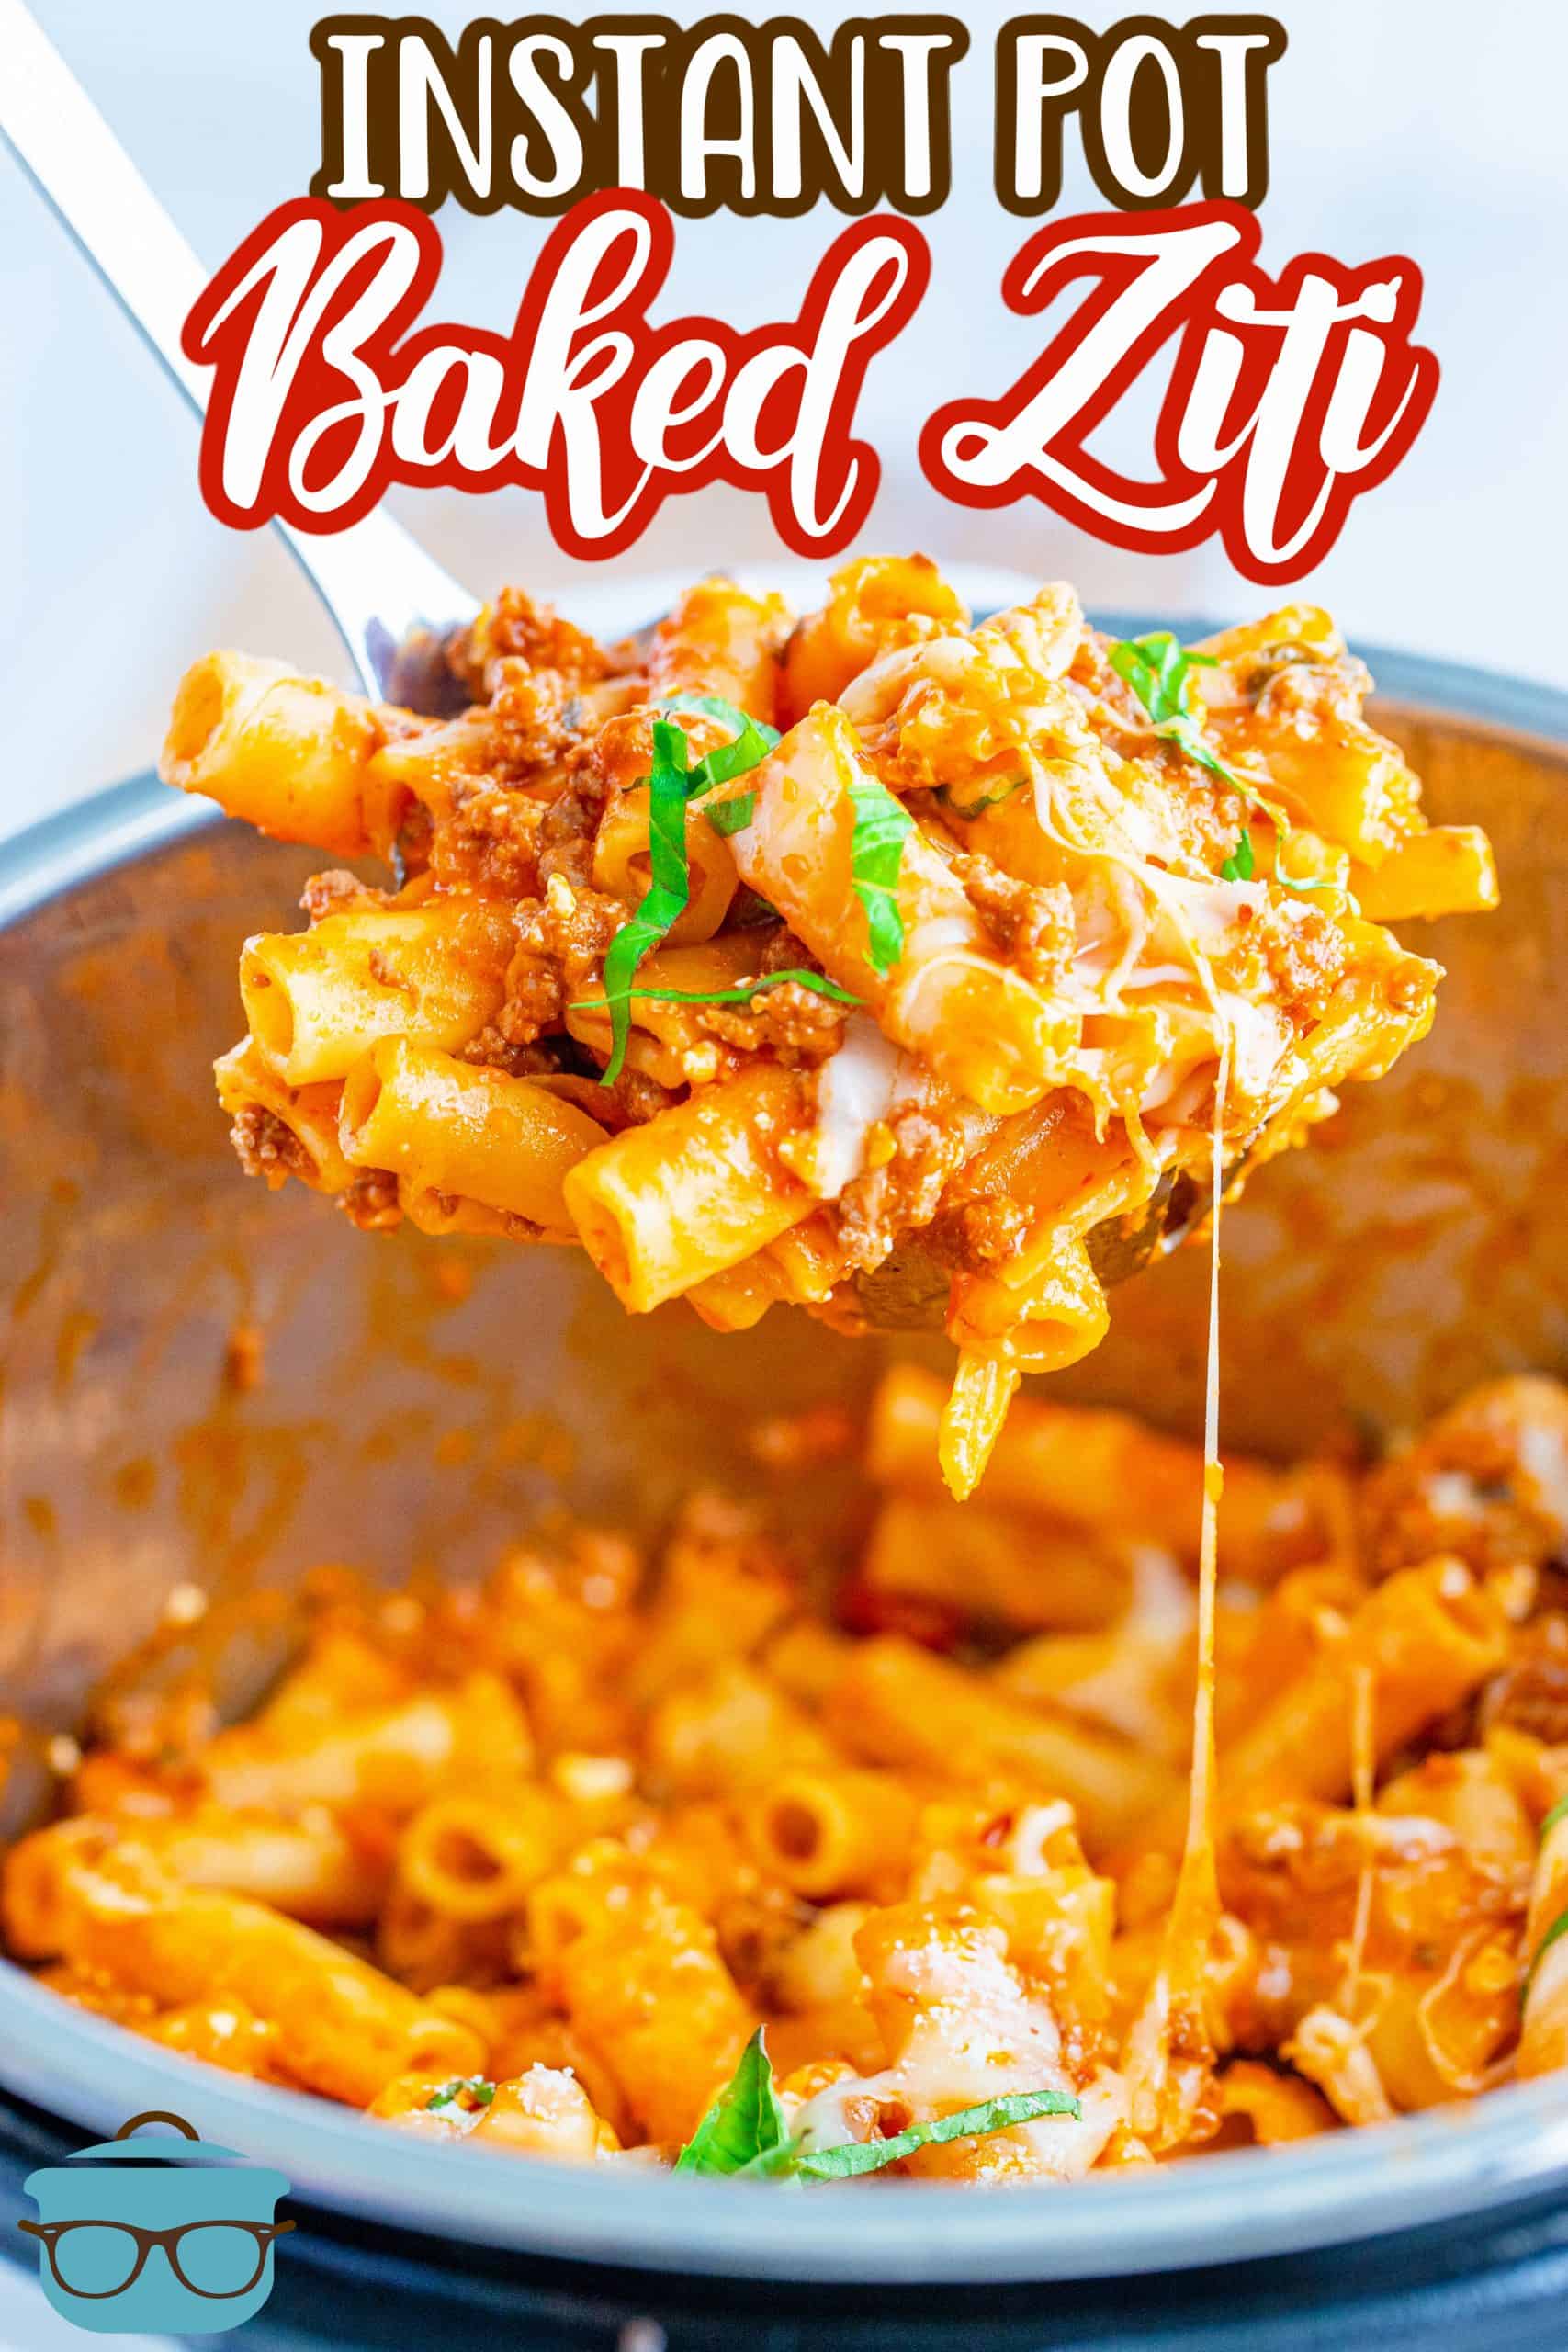 Instant Pot Baked Ziti recipe from The Country Cook, a scoop of cooked baked ziti shown on a serving spoon.